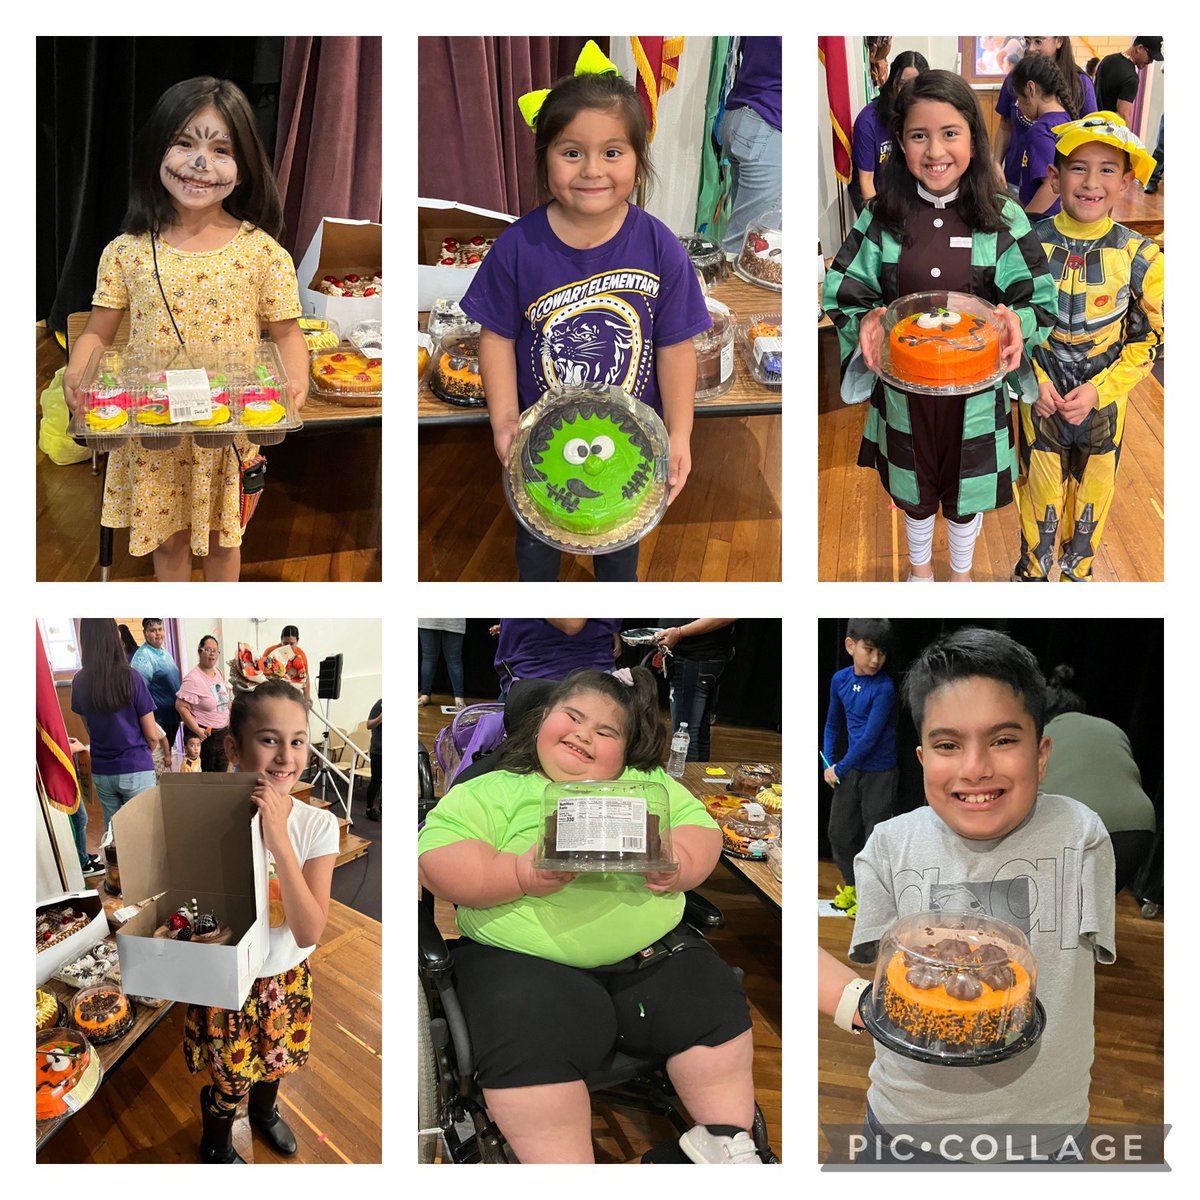 Congratulations to all our Cake Walk Winners from Friday’s Fall Festival! 🎉 #CowartSpirit #FallFestival